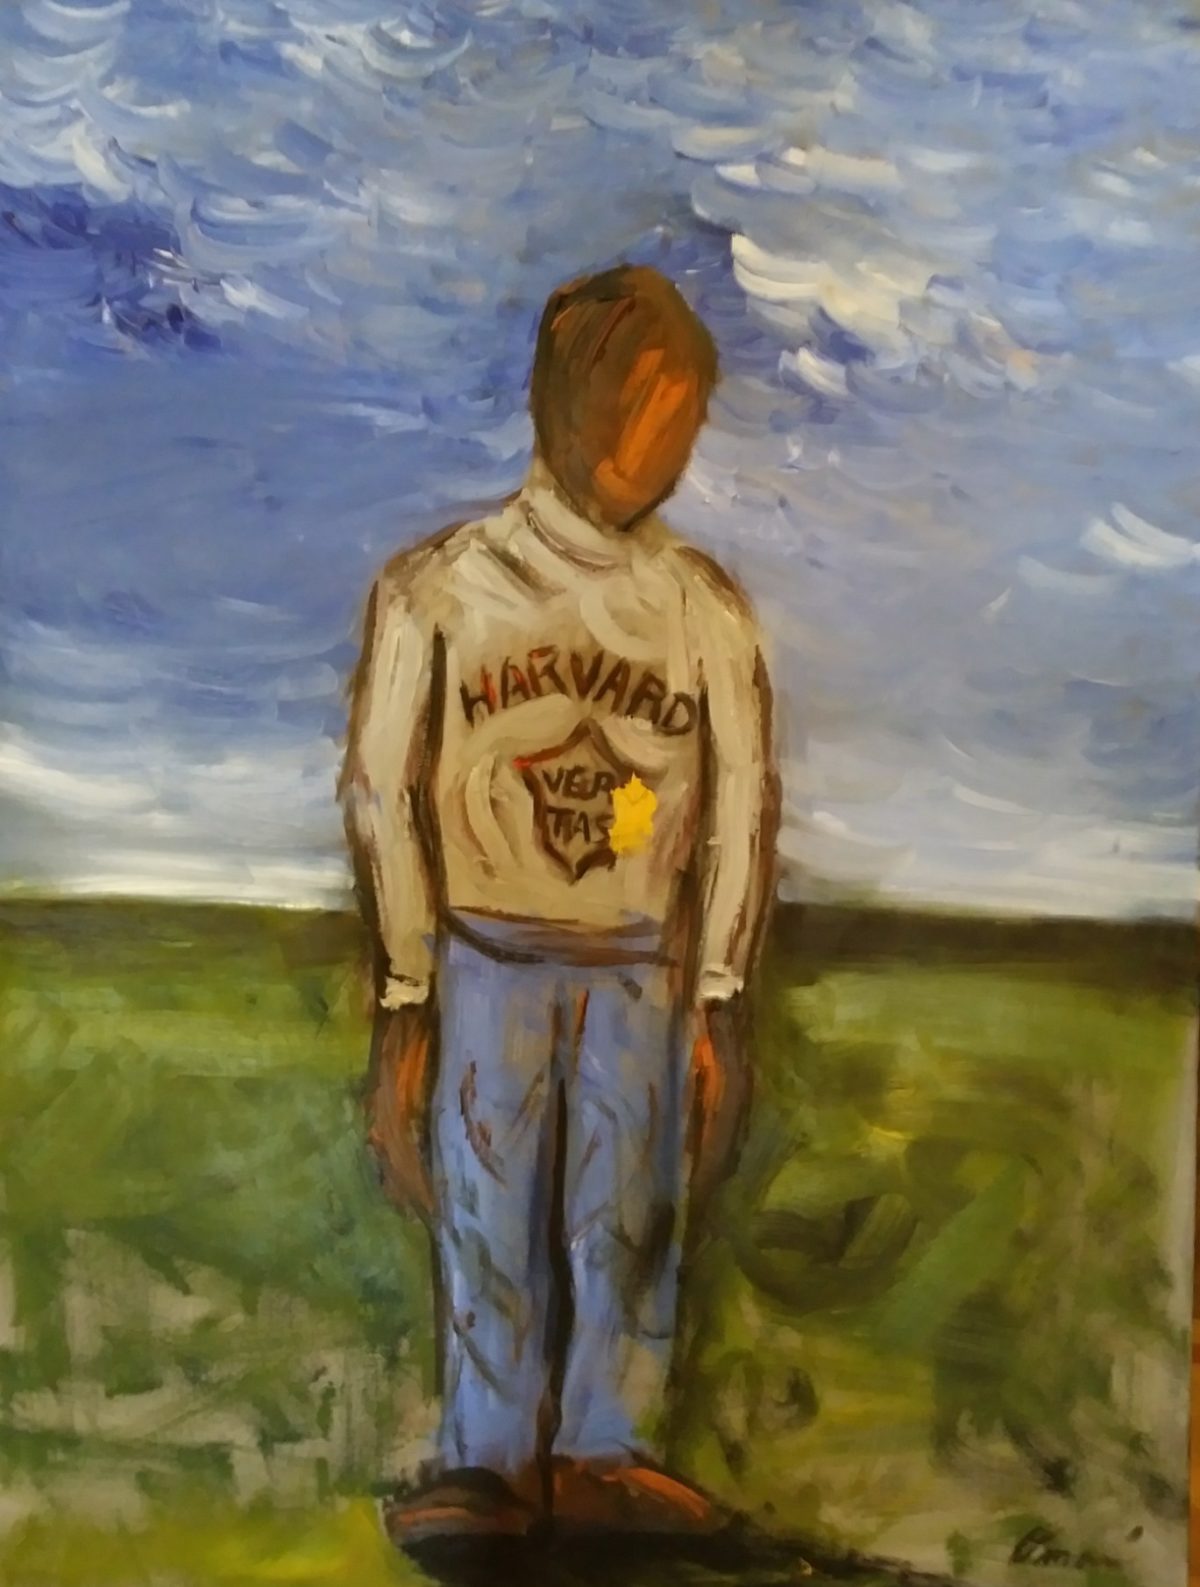 Painting by Omari Booker of himself as a child wearing his dad's Harvard sweater.